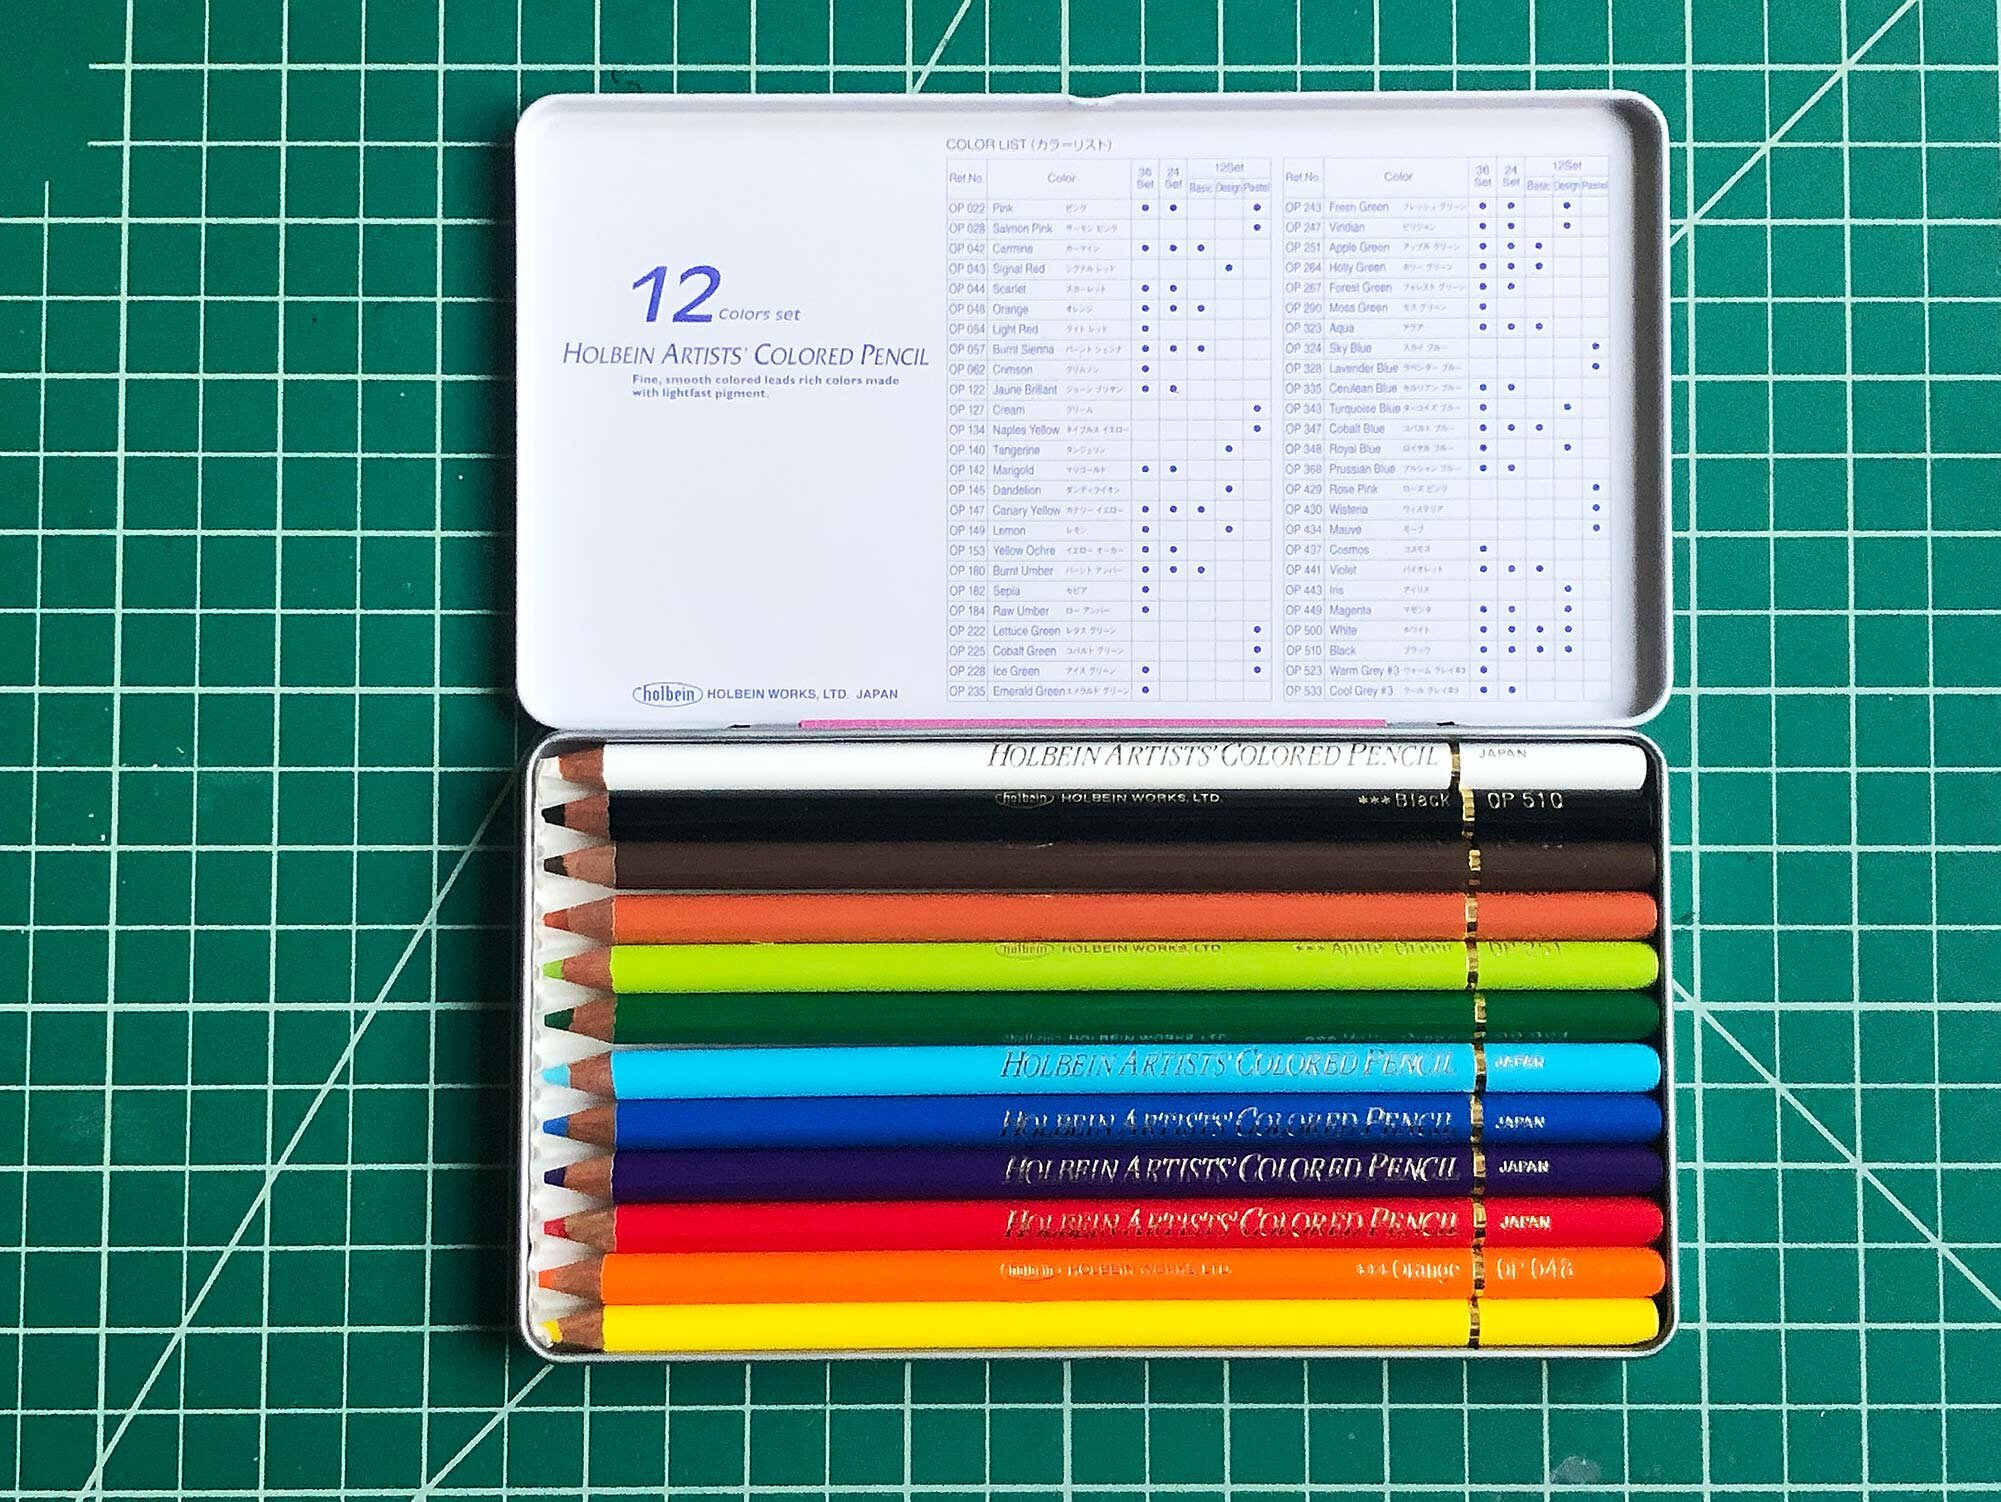 Holbein Artists' Colored Pencils has a hinged tin